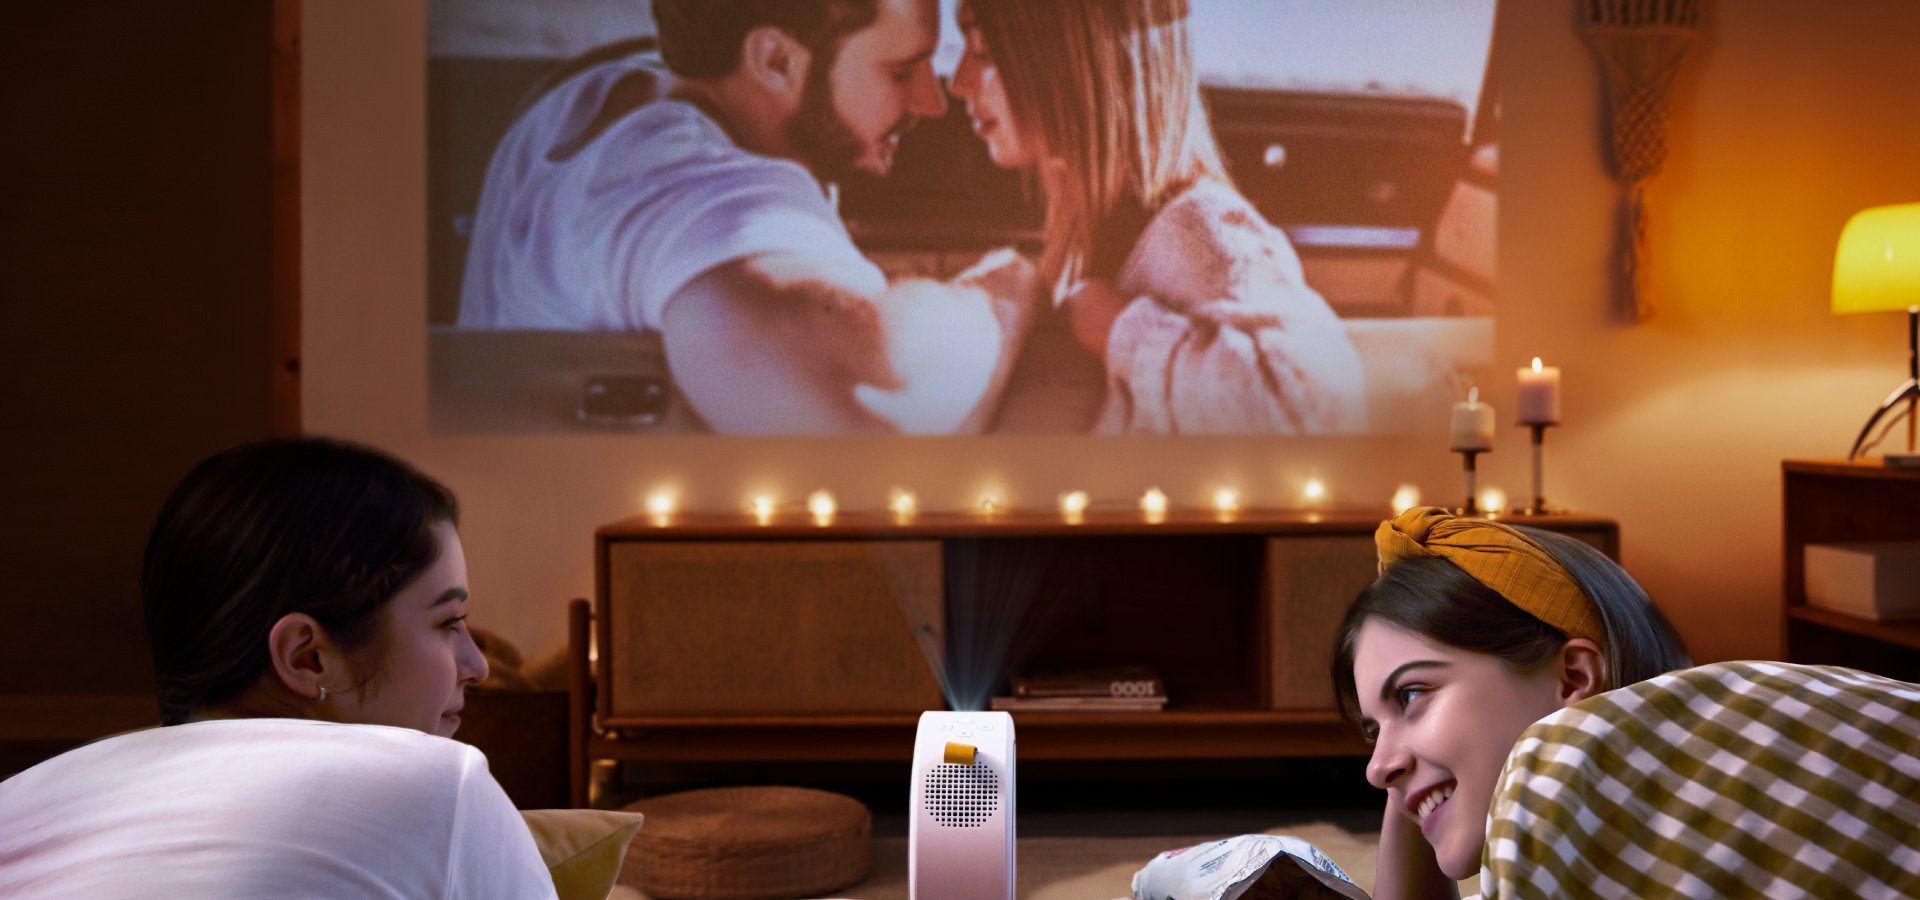 BenQ GV30 portable mini projector sparks magical moments when streaming your favorite films or binge-watching via Android TV 9.0. 